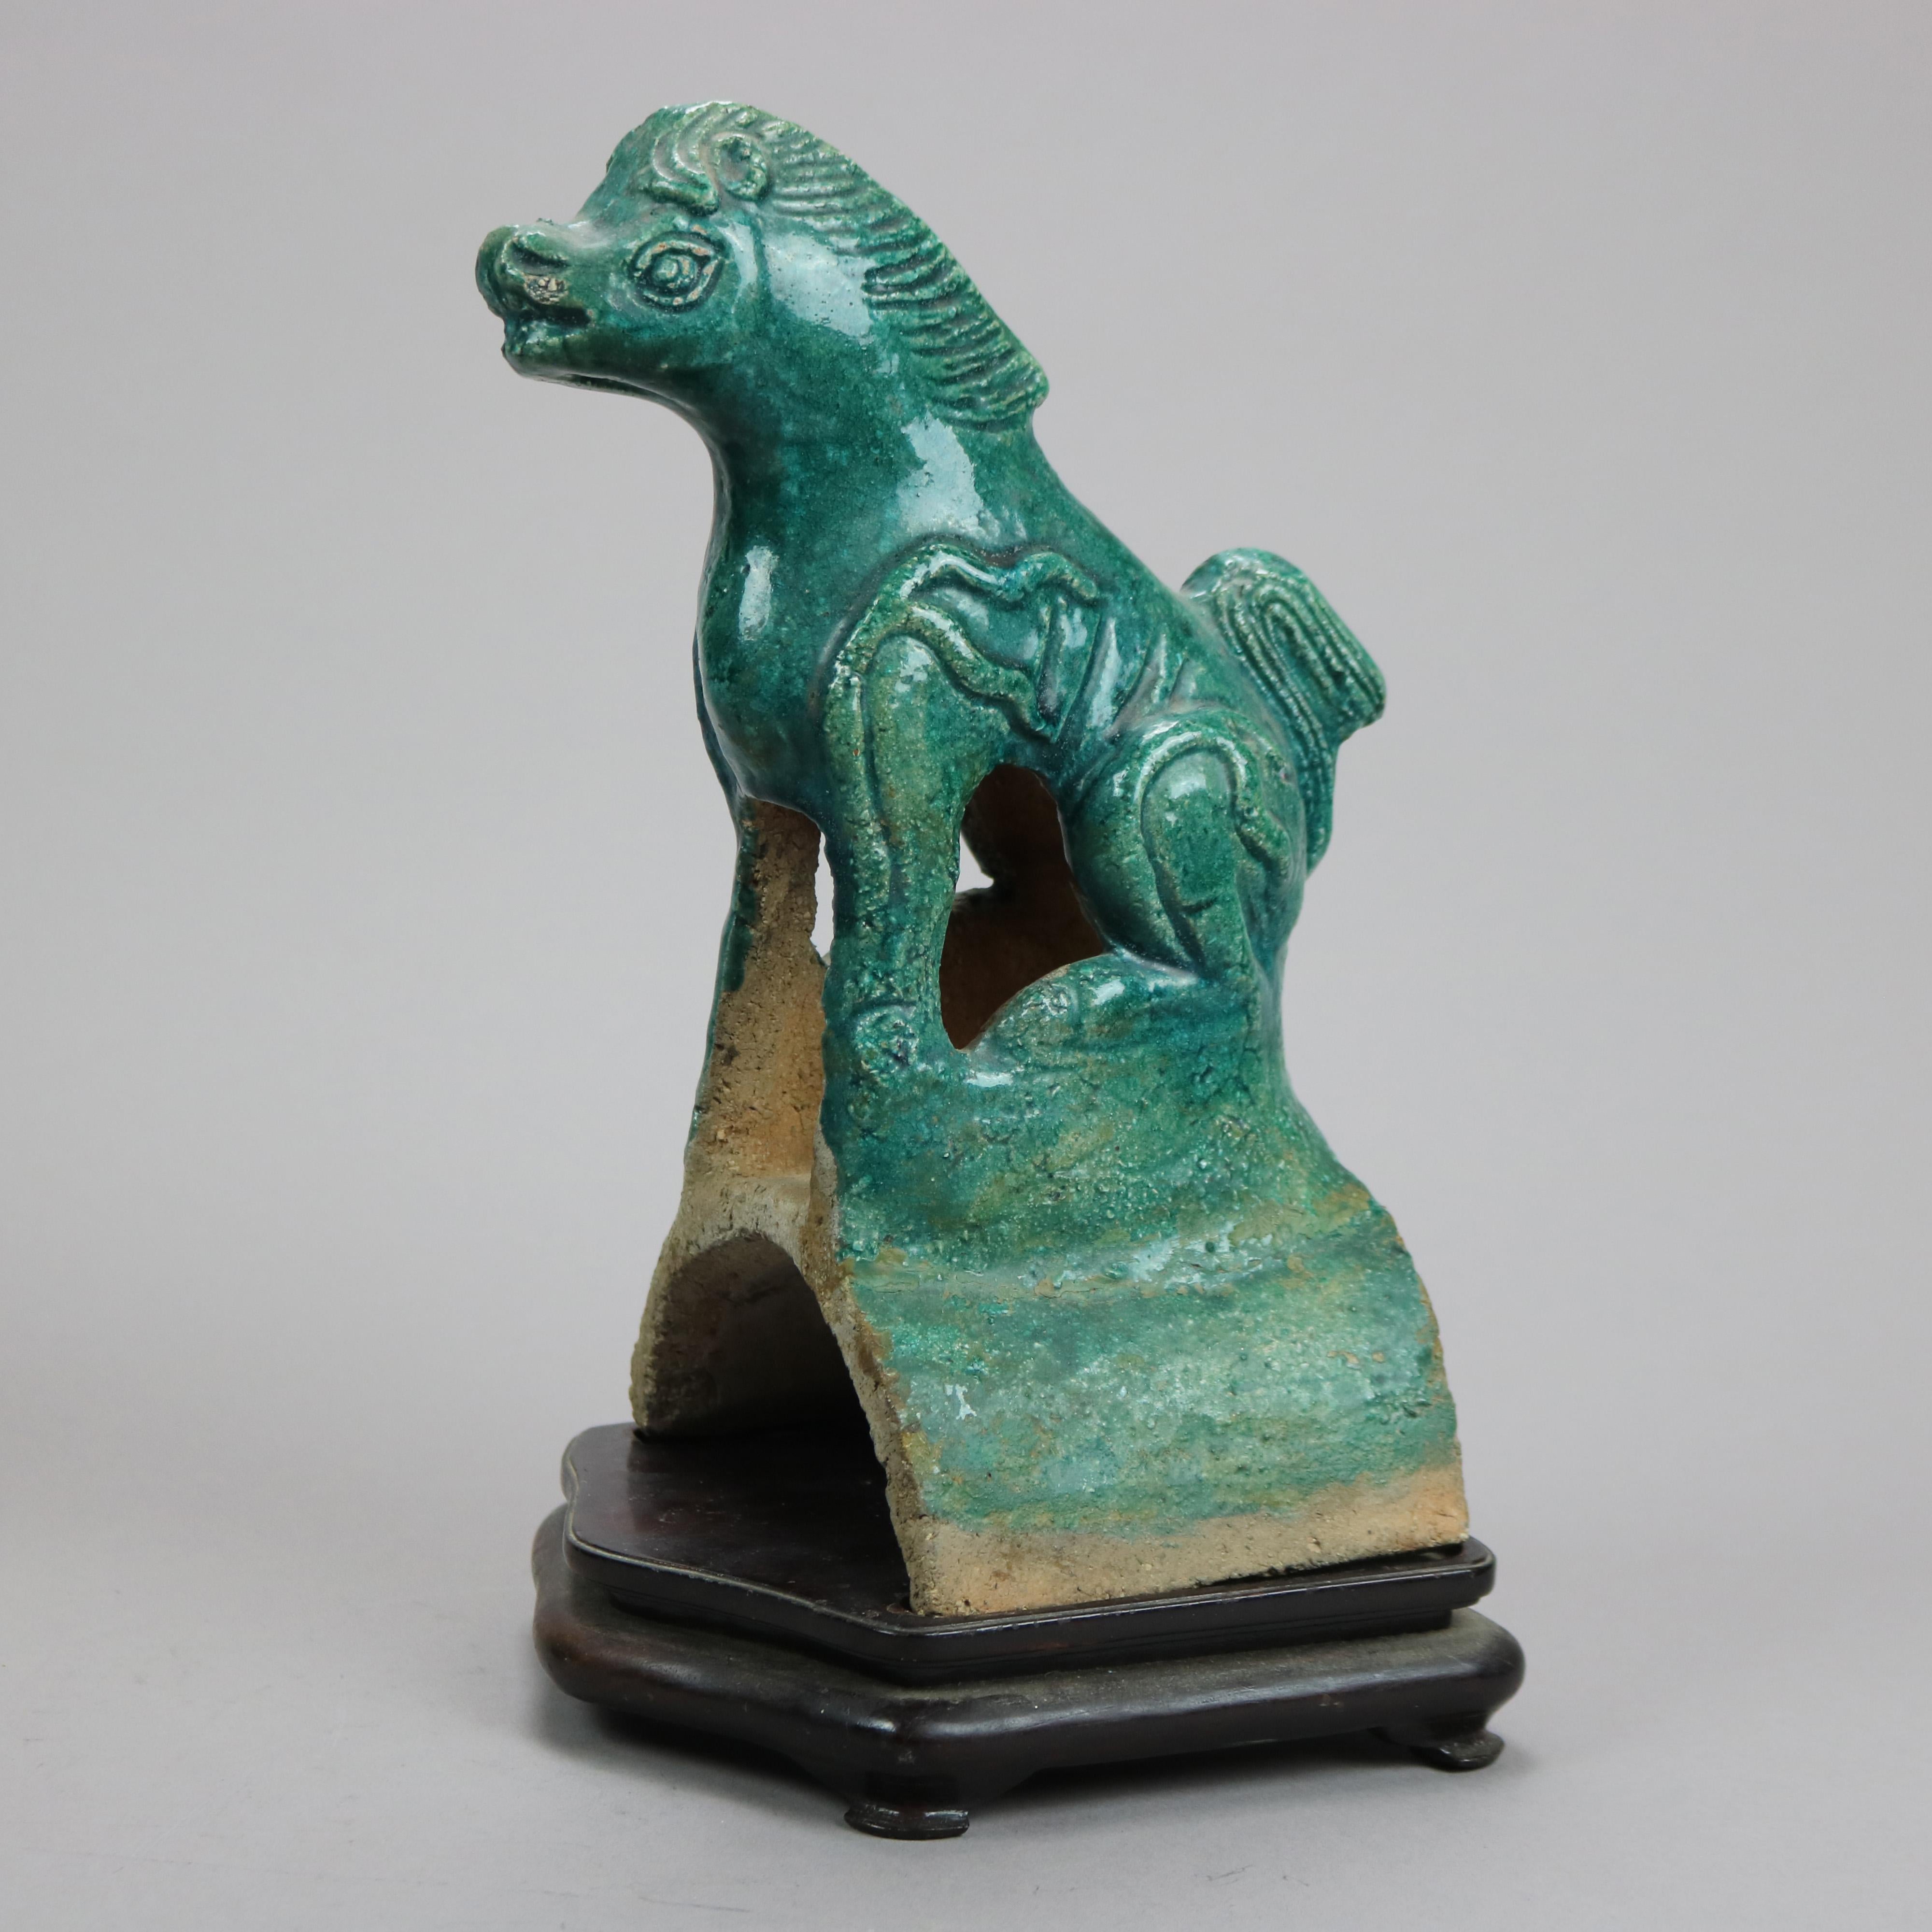 An antique pair of large Chinese figures offer hand made terra cotta horse figures glazed in green and seated on hardwood plinths, 19th century

Measures - 11.5''H x 6''W x 6.5''D.